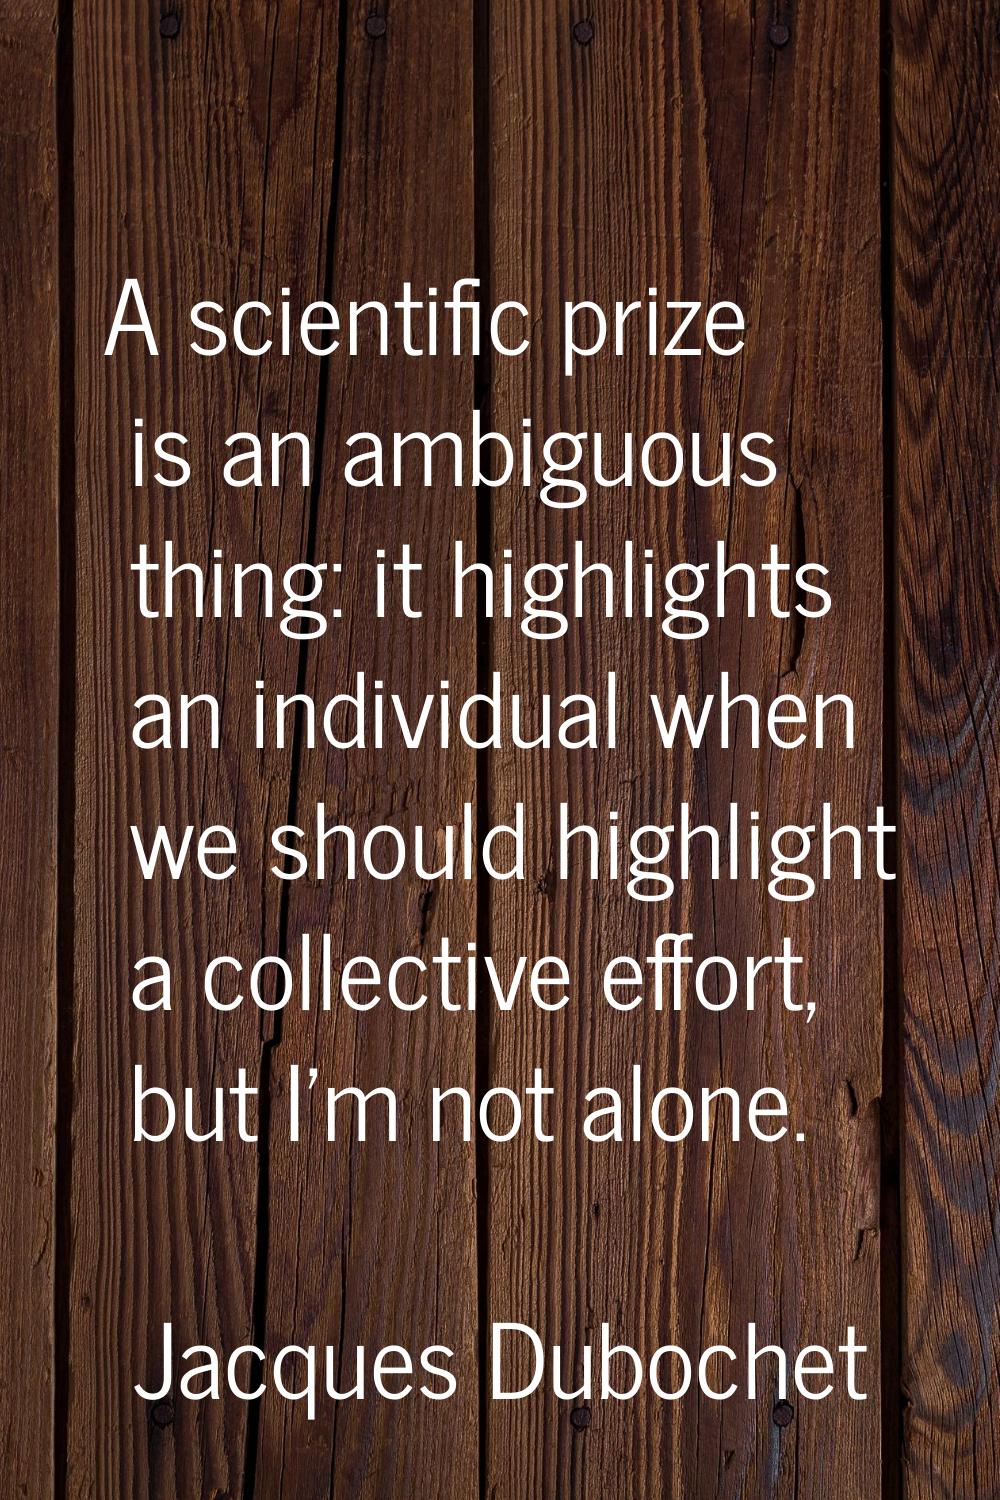 A scientific prize is an ambiguous thing: it highlights an individual when we should highlight a co